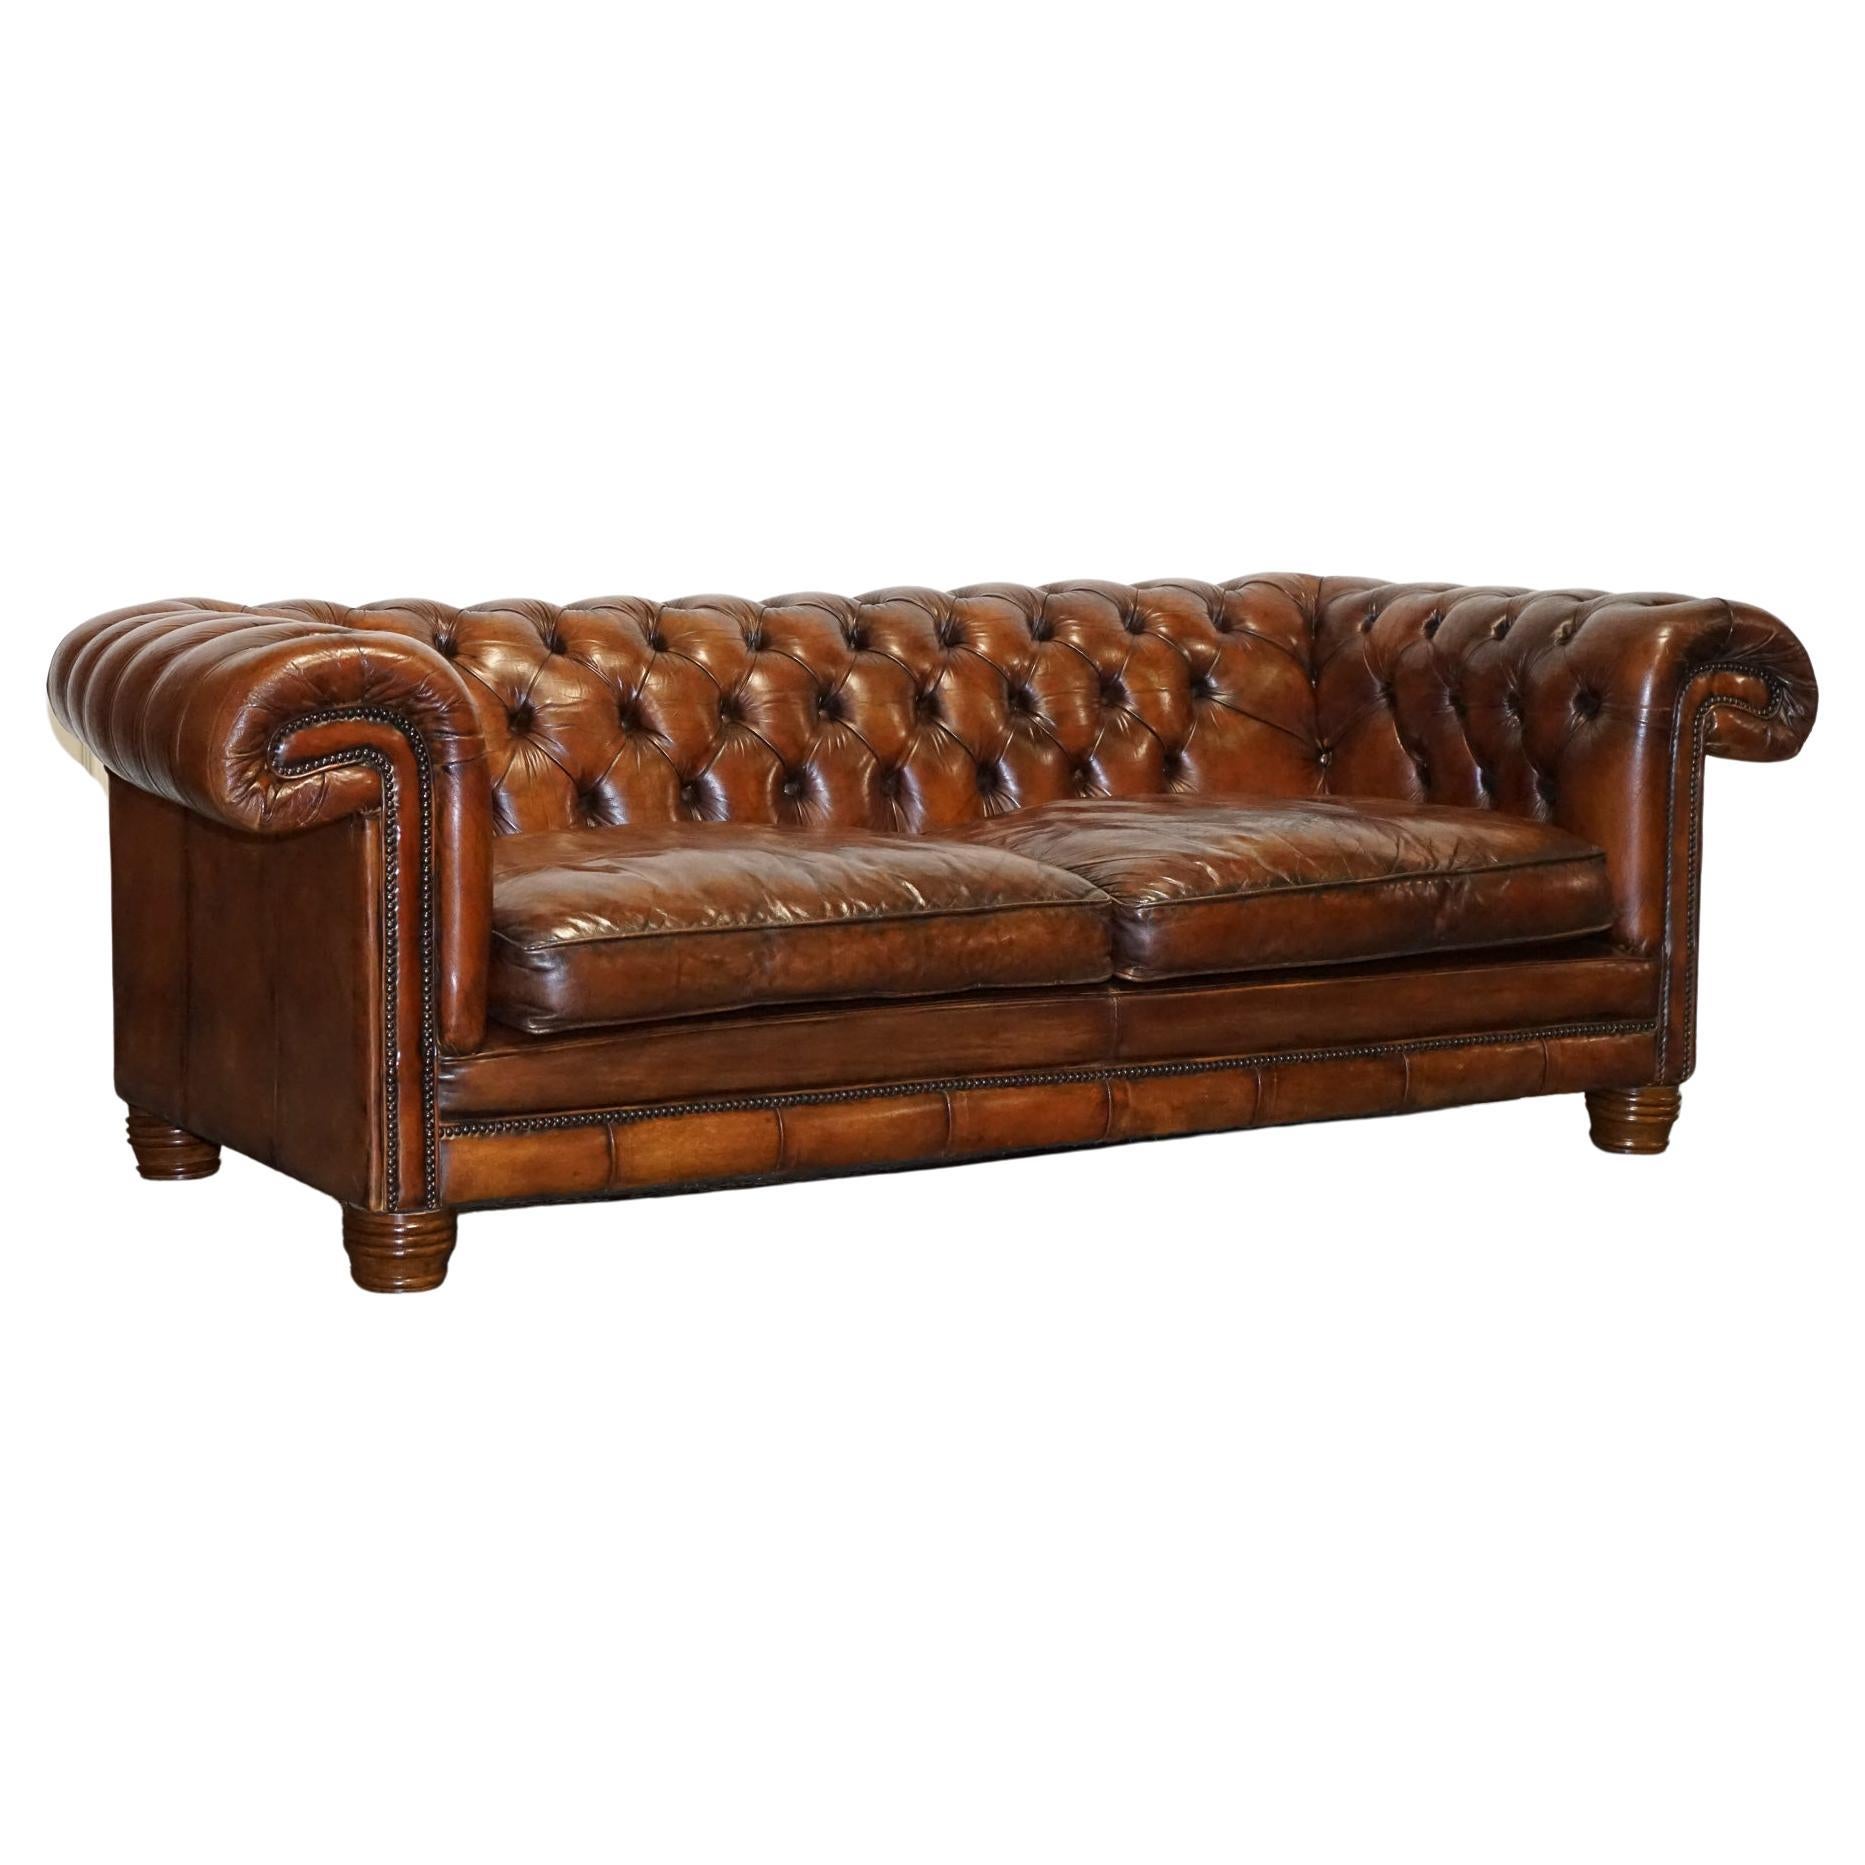 Hand Dyed Restored Whiskey Brown Leather Chesterfield Club Sofa English